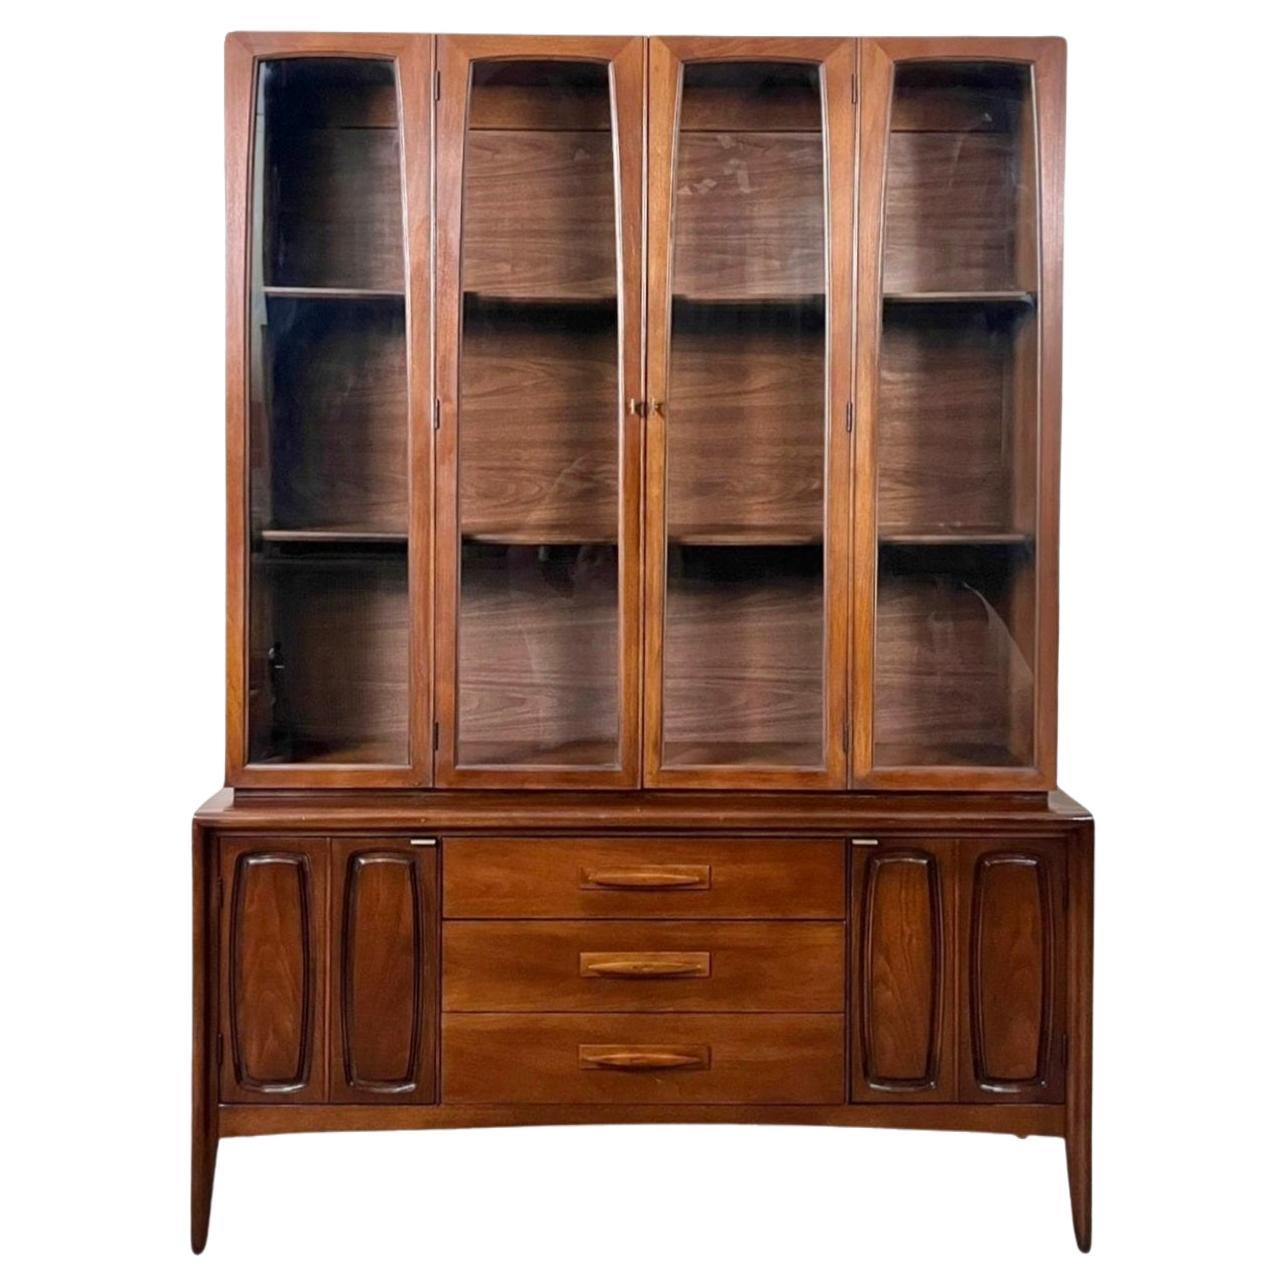 Broyhill Emphasis Mid Century Modern China Cabinet Display Case c. 1960s